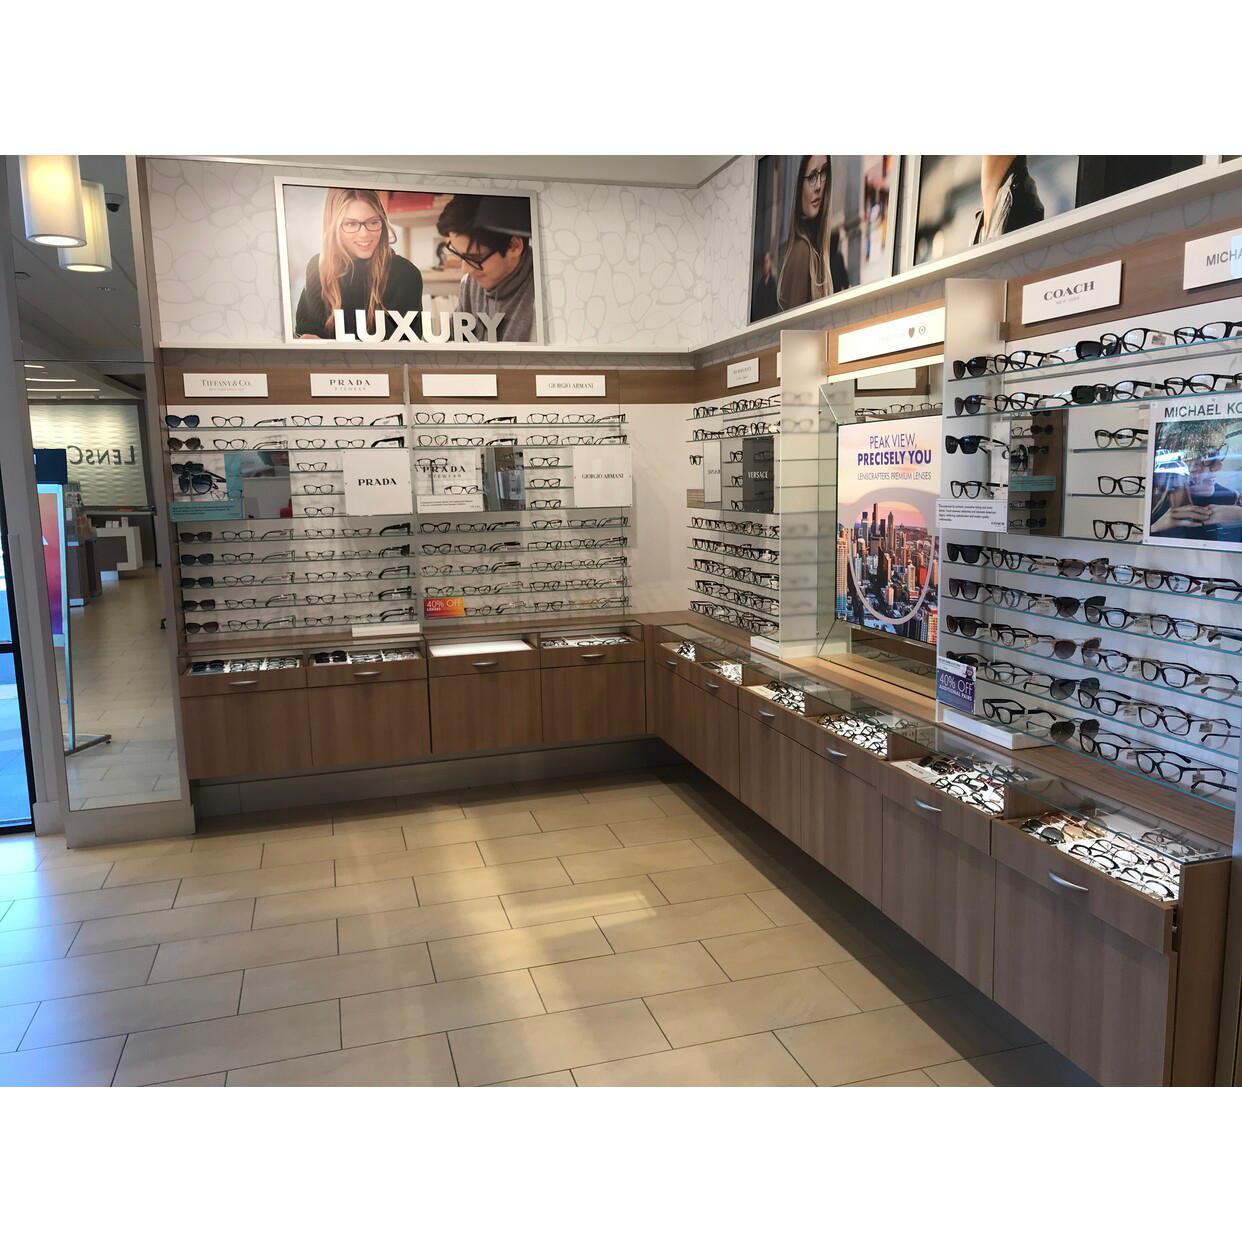 Image 6 | LensCrafters